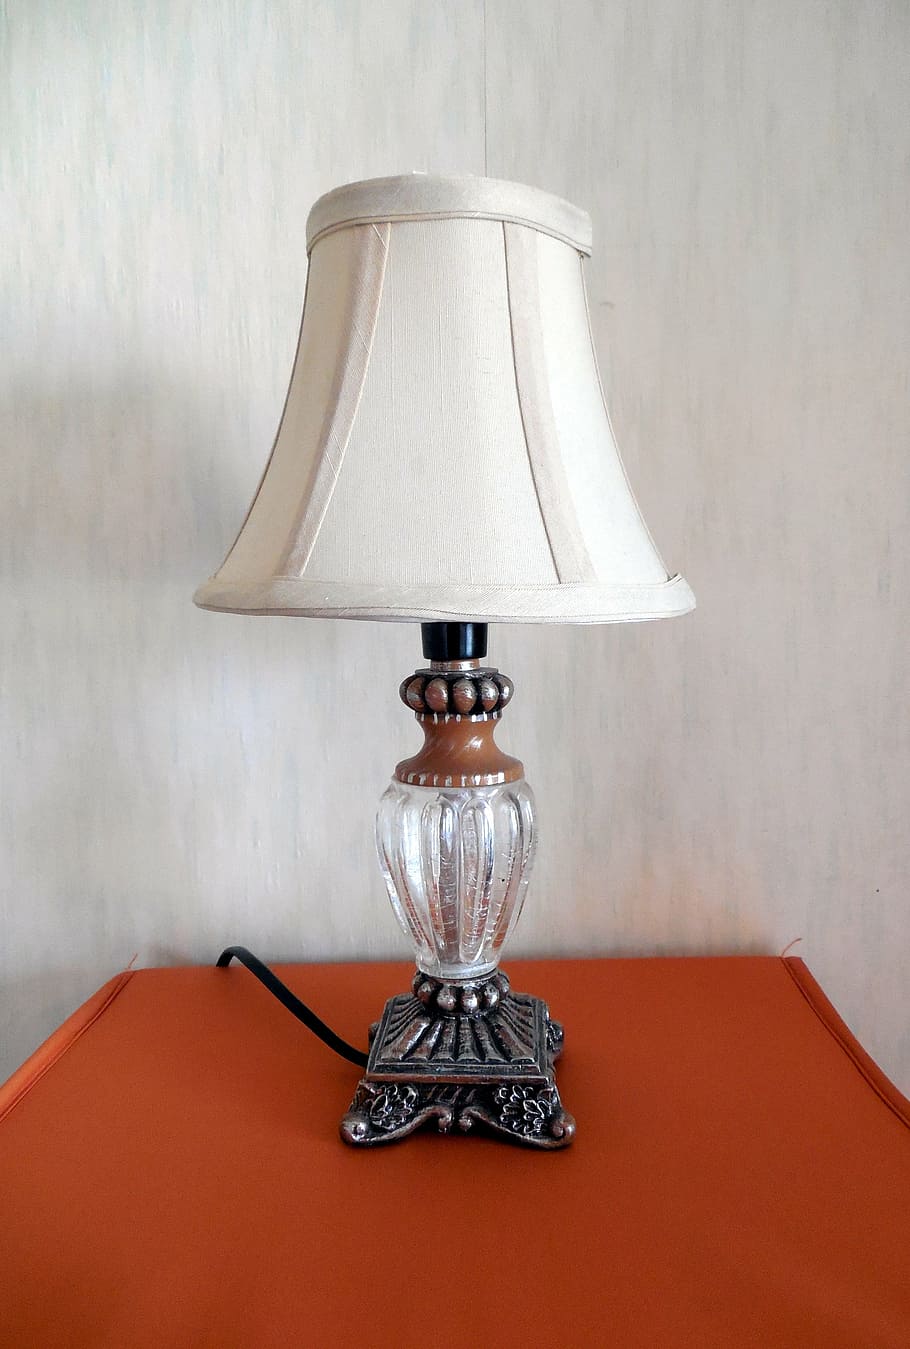 table lamp, lampshade, decorative, retro, old, electric lamp